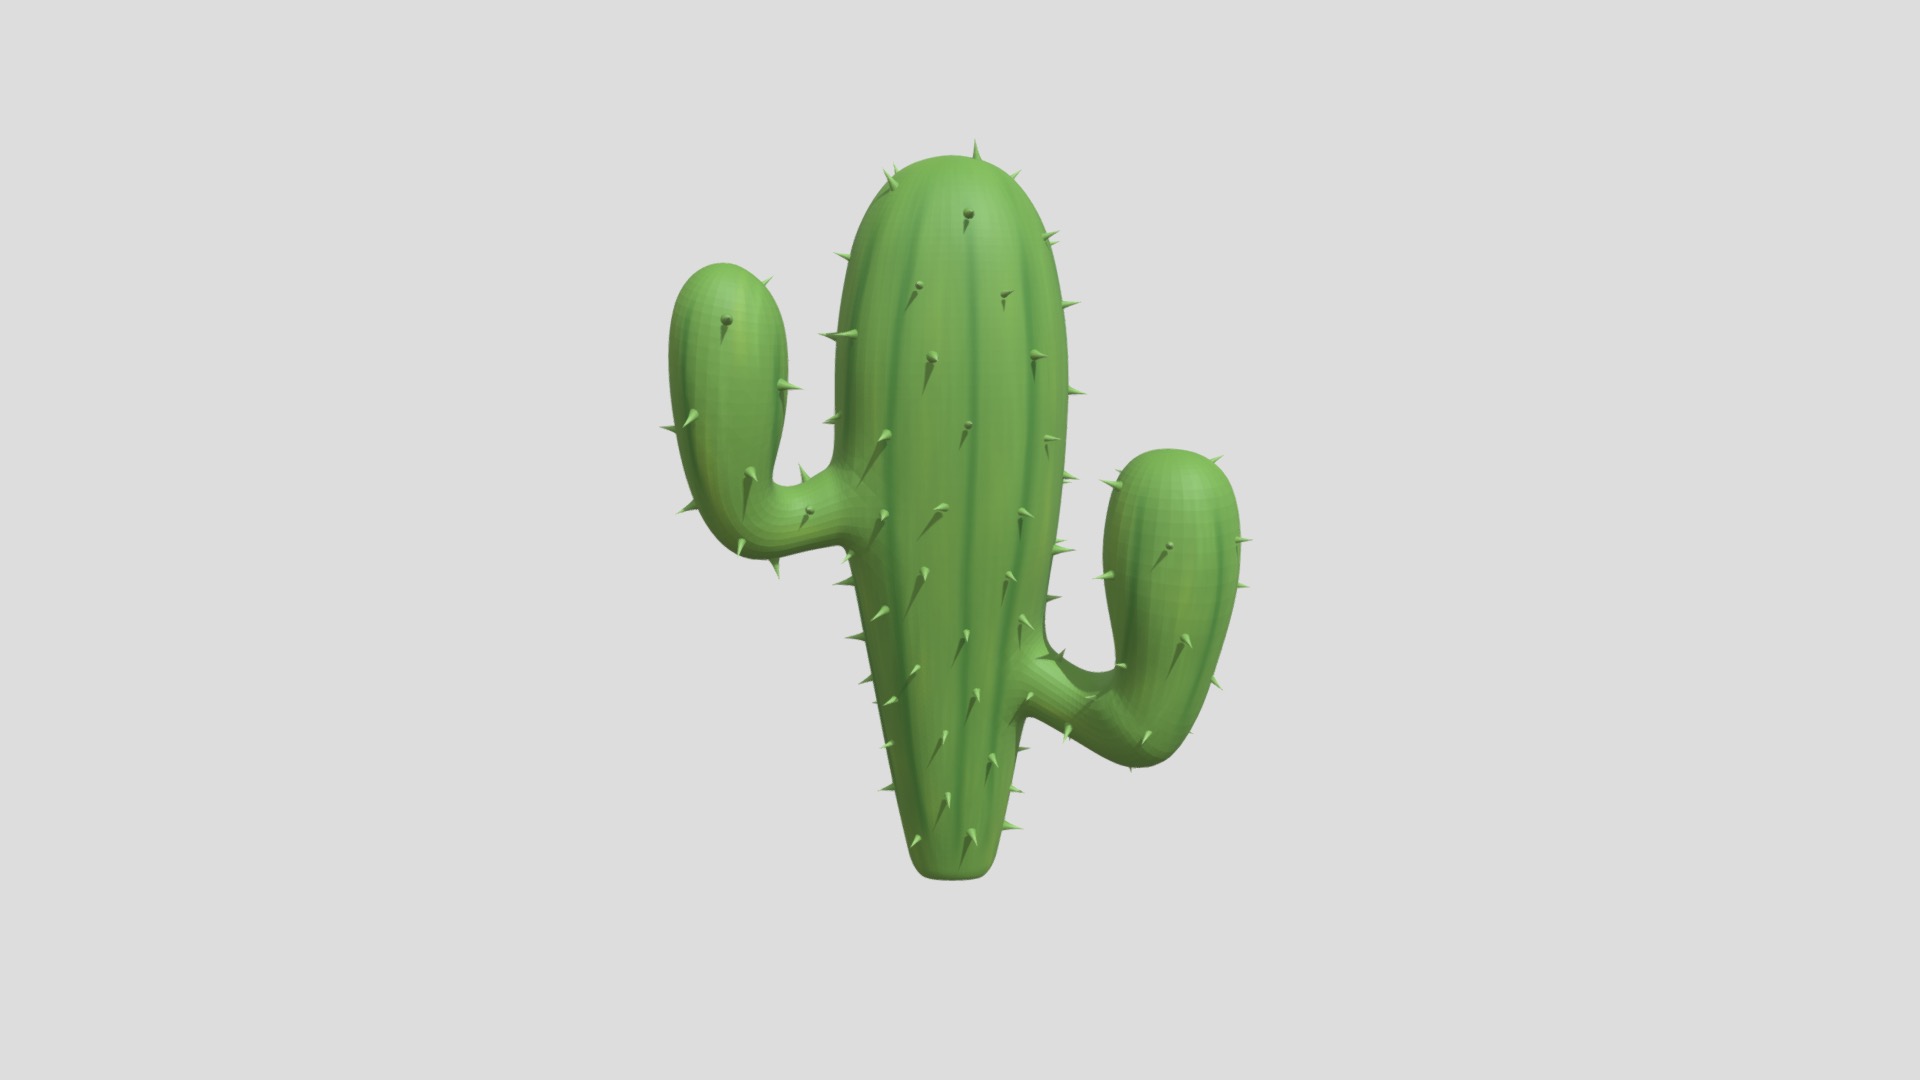 3D model Cactus - This is a 3D model of the Cactus. The 3D model is about a green cucumber on a white background.